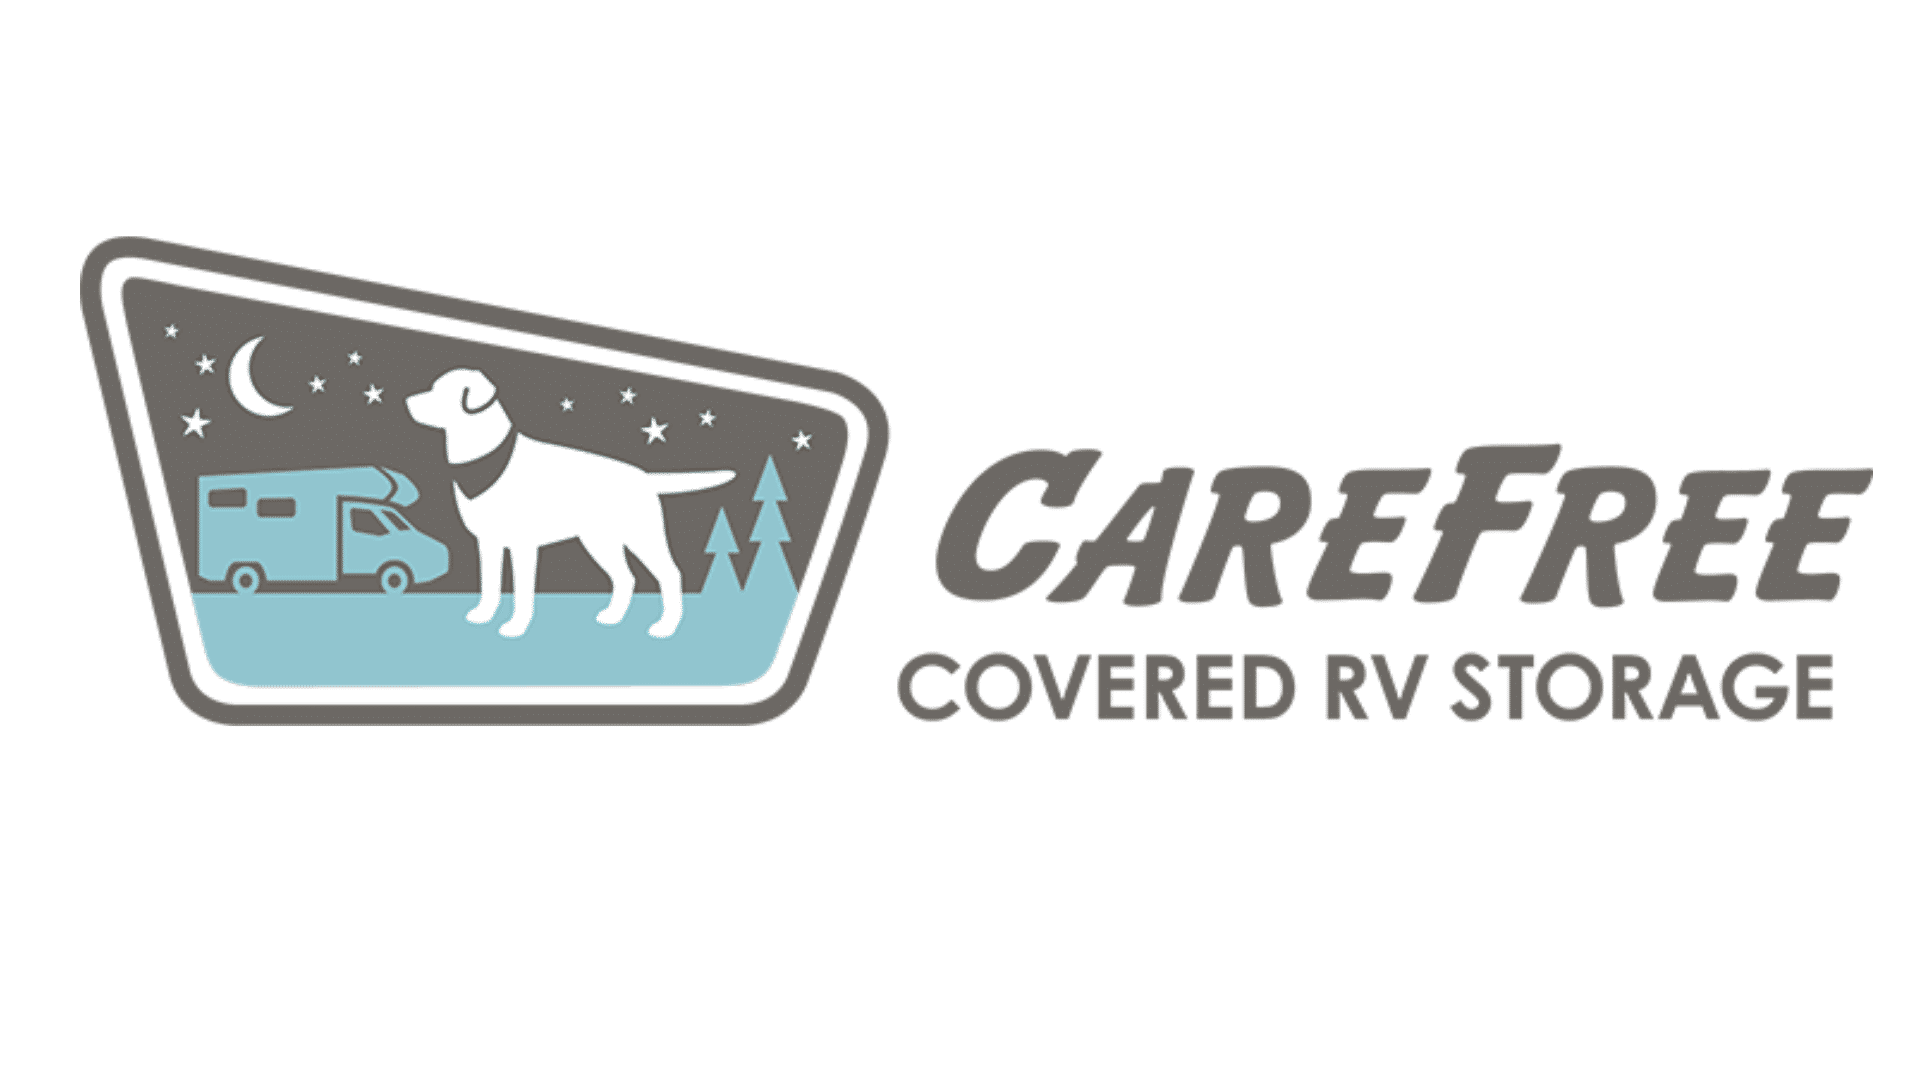 Carefree Covered RV